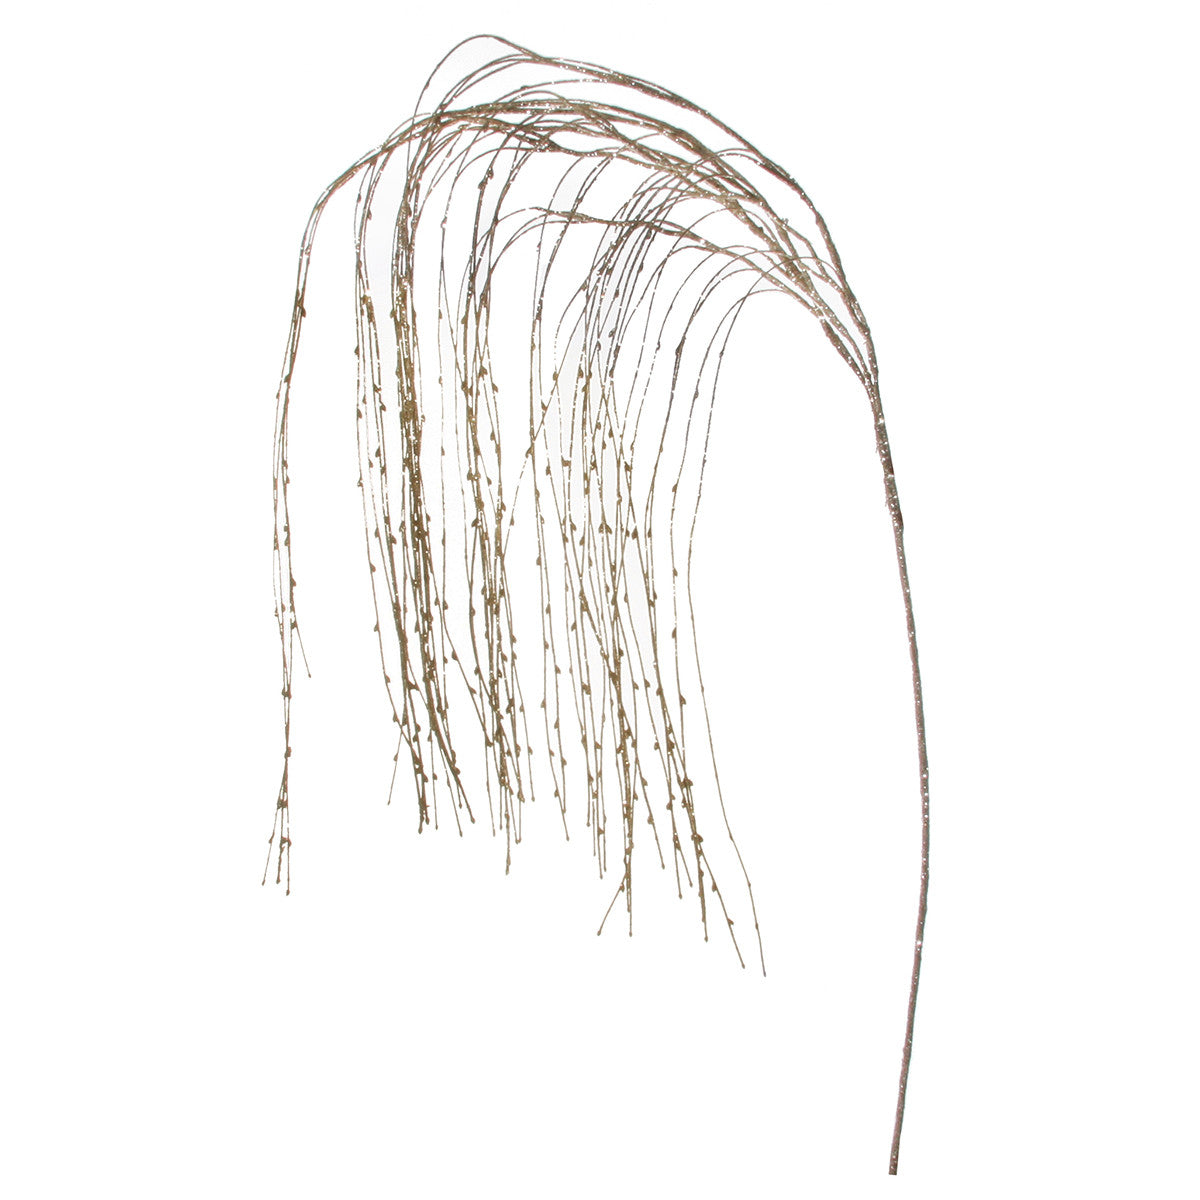 ShiShi Weeping willow champagne 67 inches